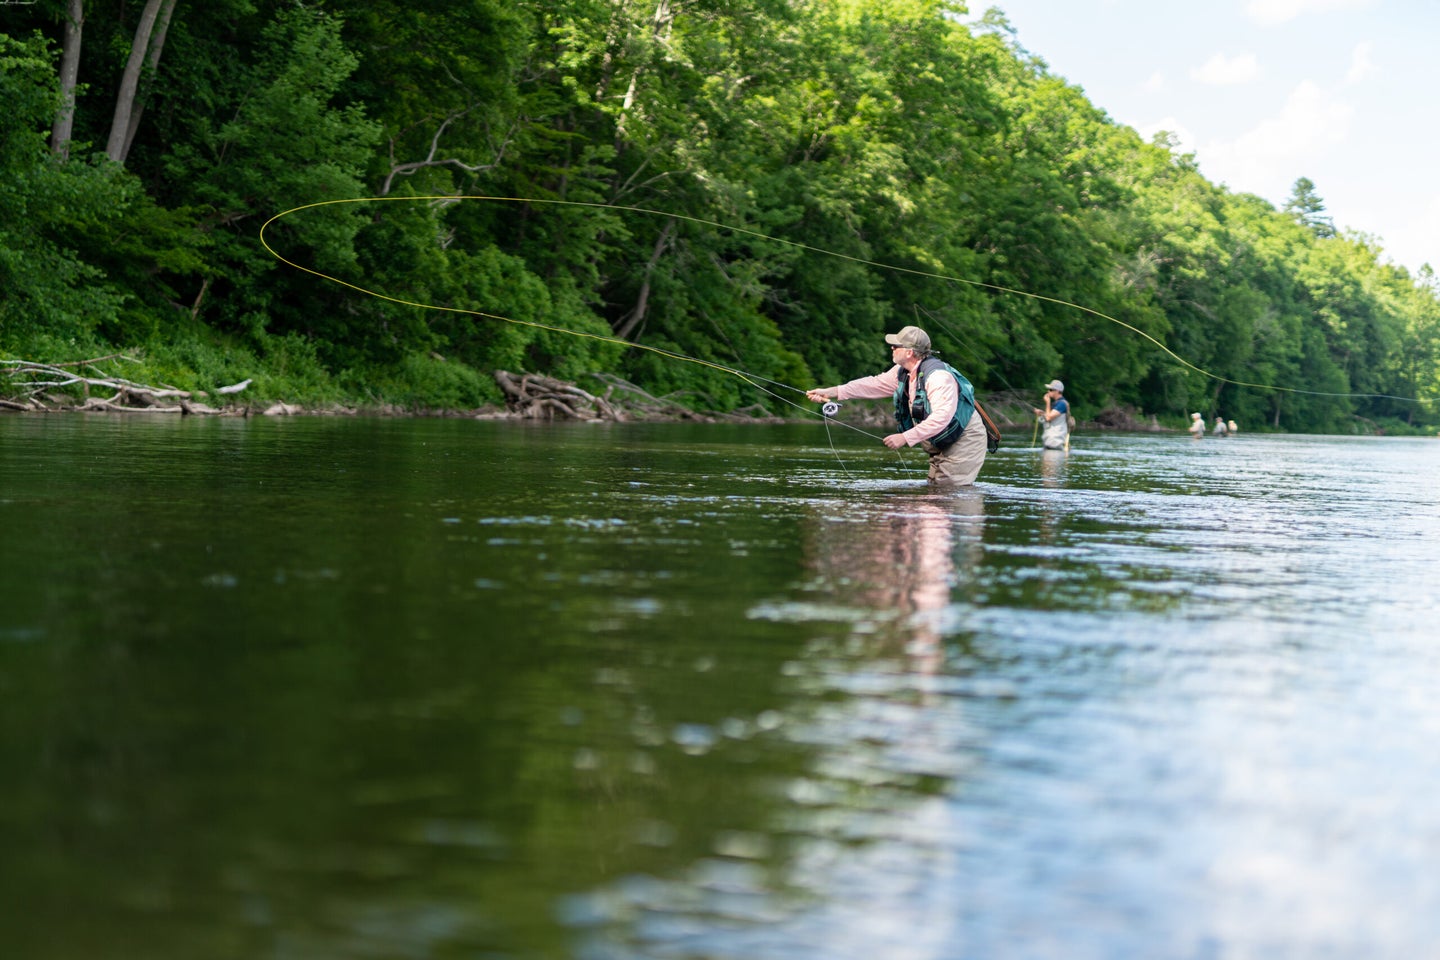 Dave Hurteau casts on the Delaware River for the Field & STream best fly rod test